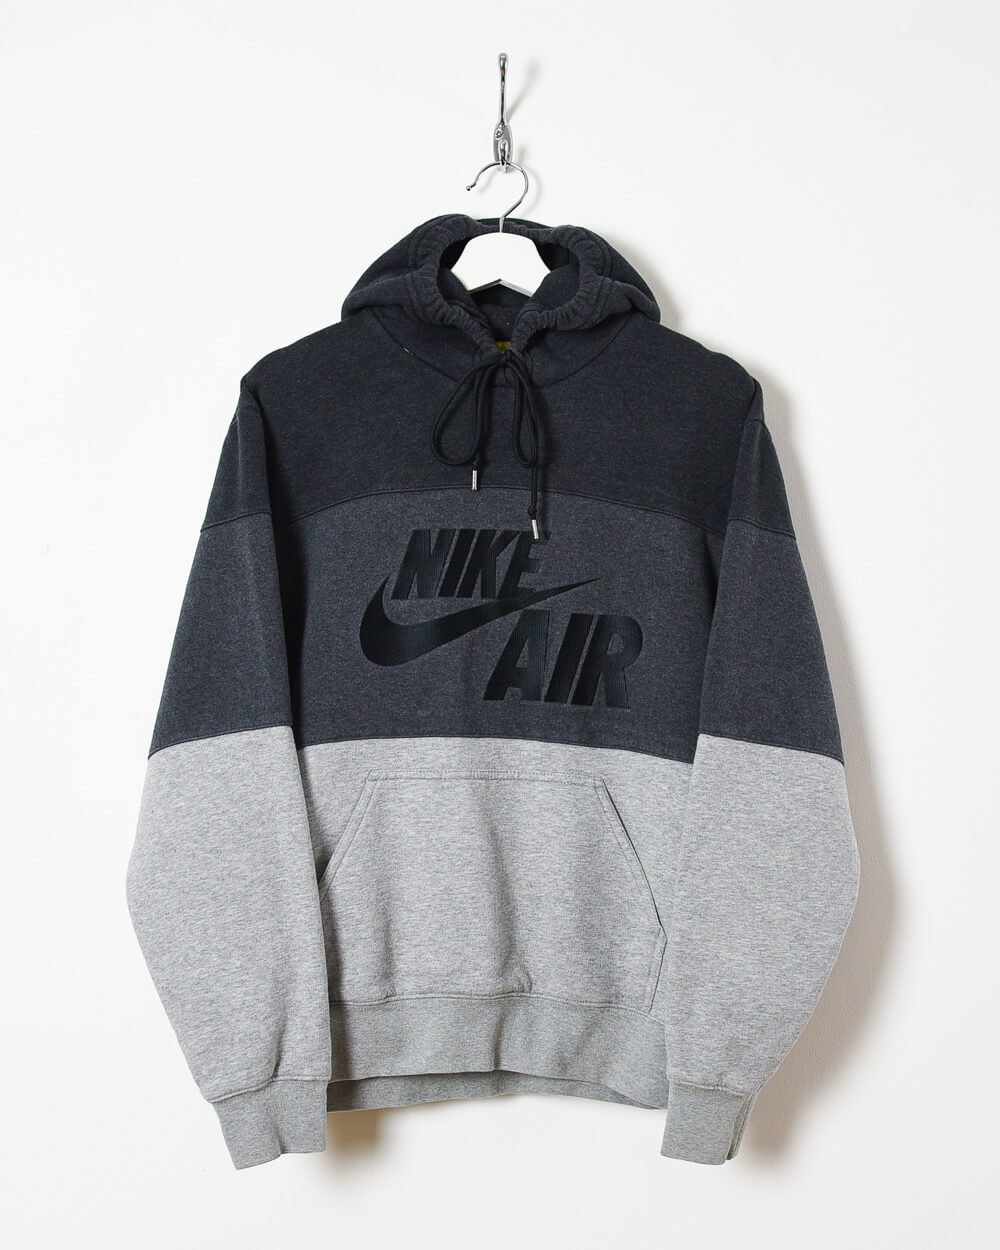 Nike Air Hoodie - Small - Domno Vintage 90s, 80s, 00s Retro and Vintage Clothing 